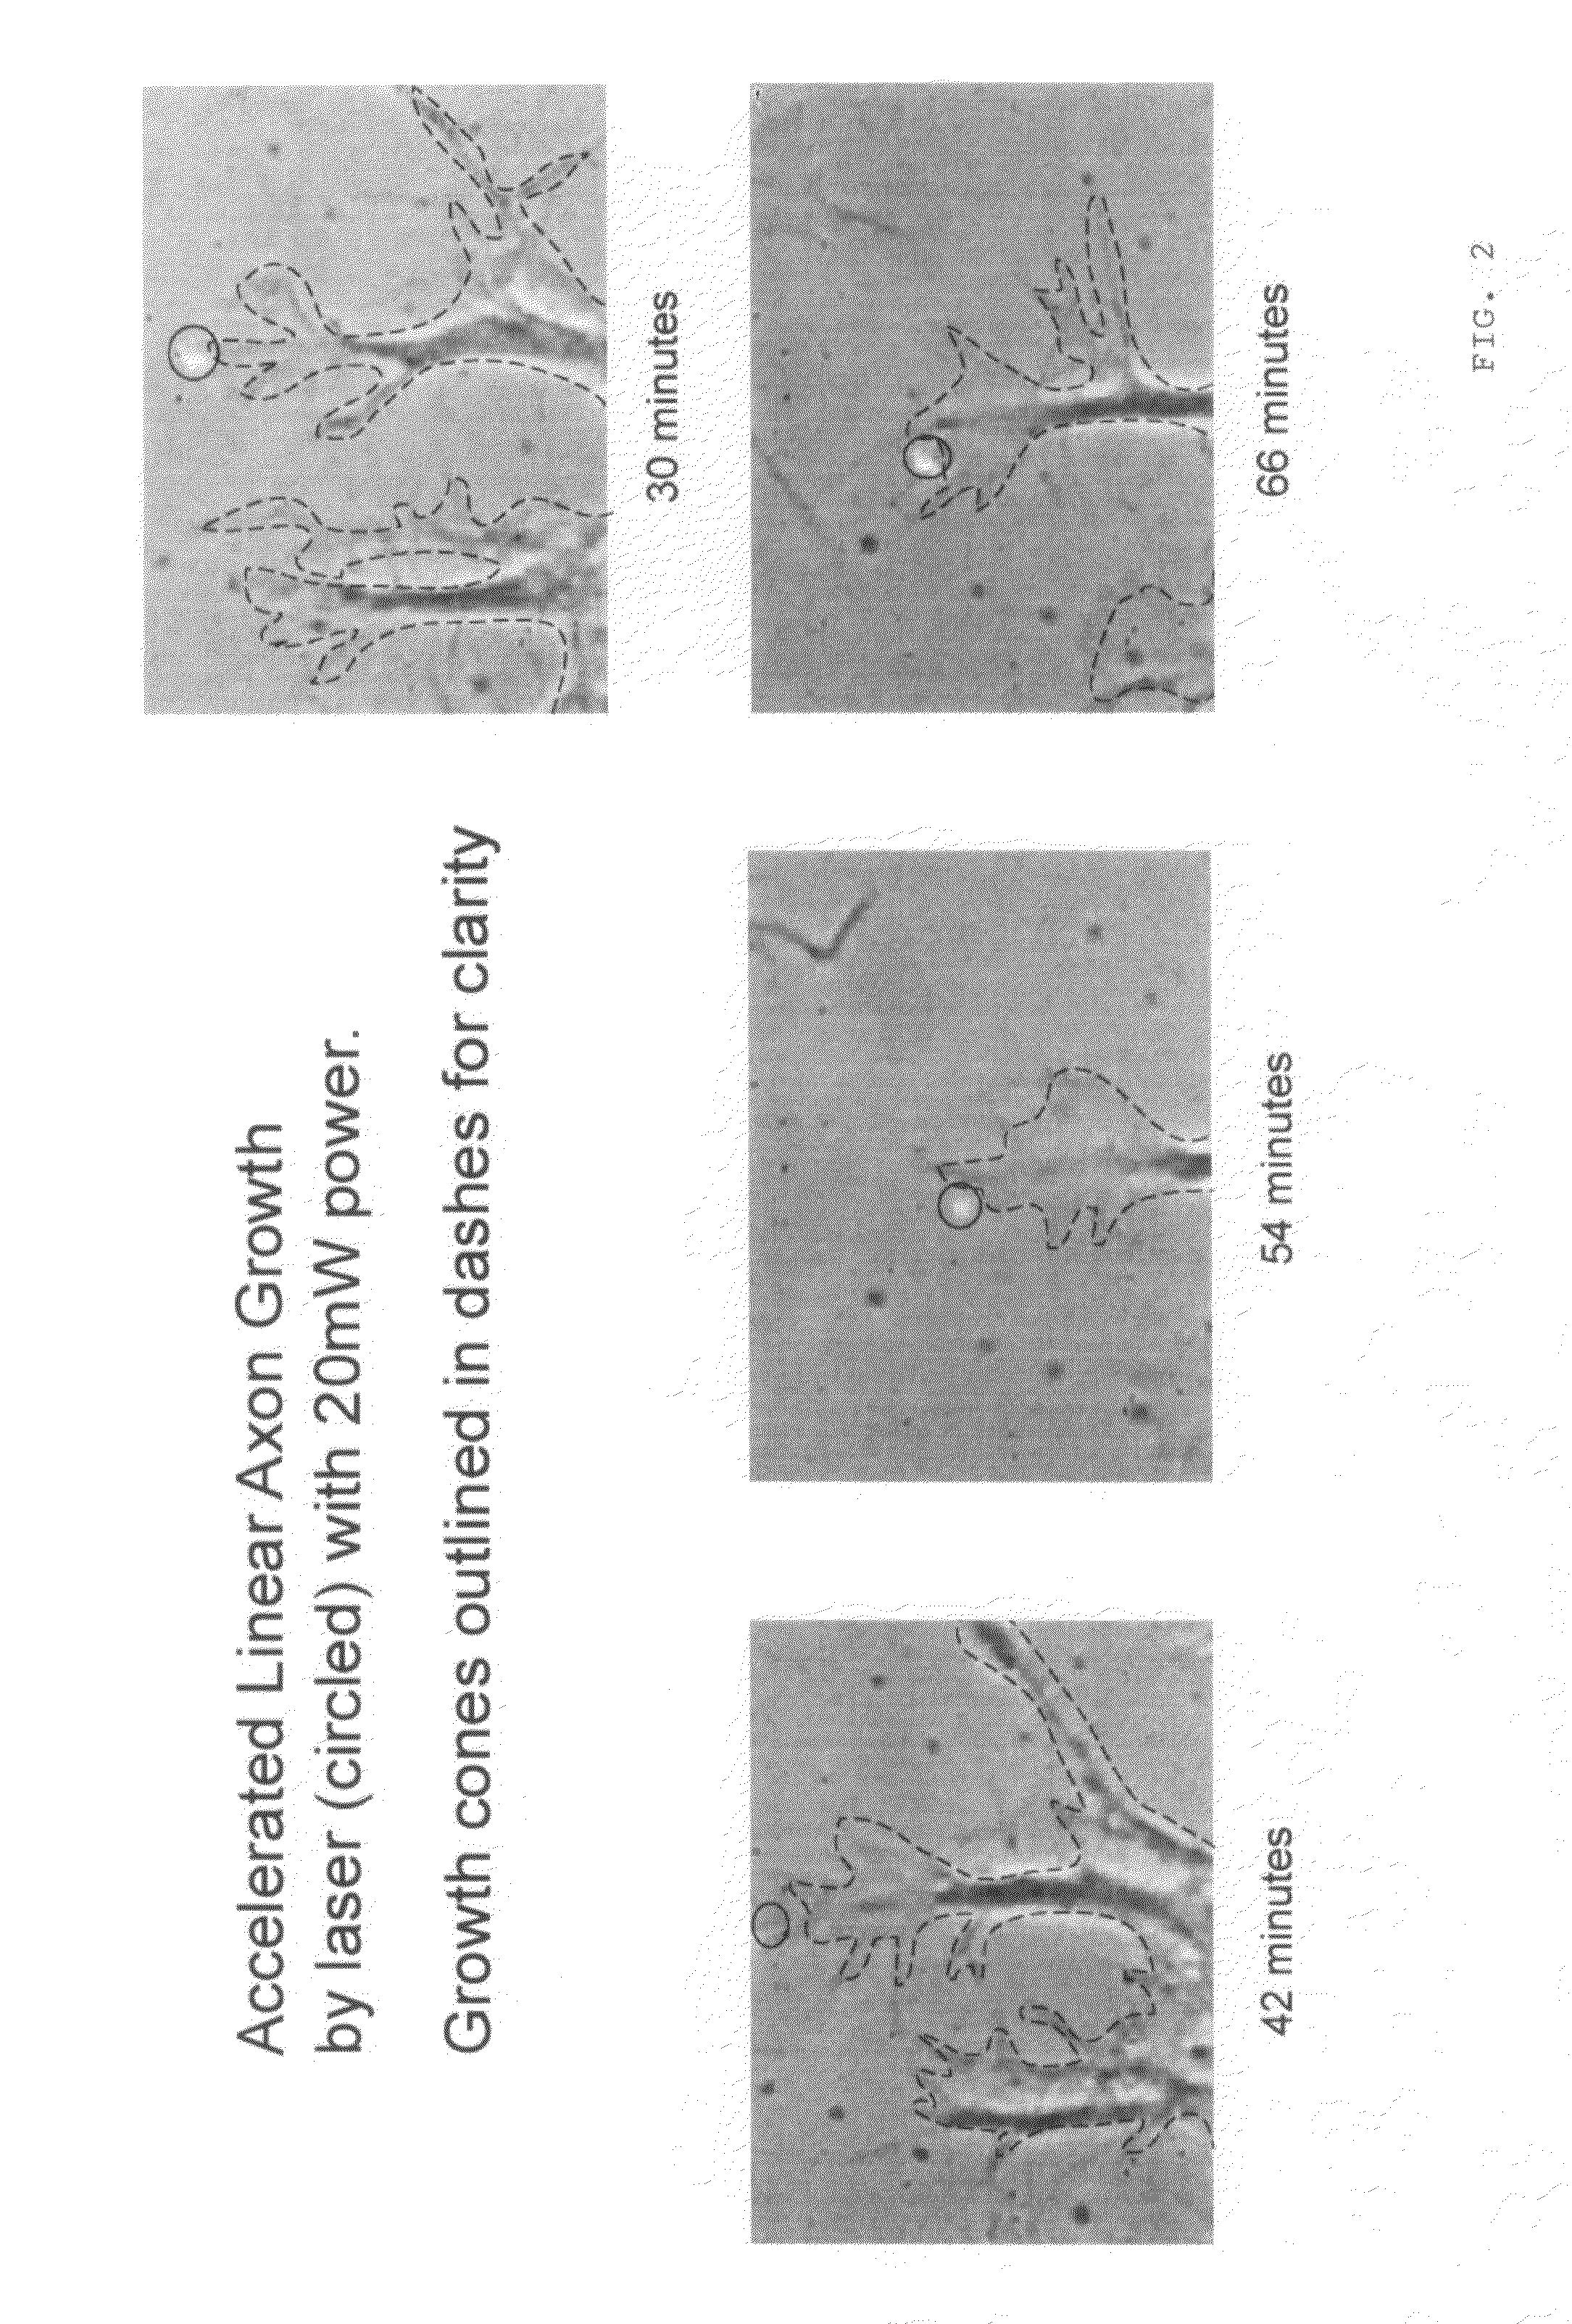 Optical cell guidance method and apparatus